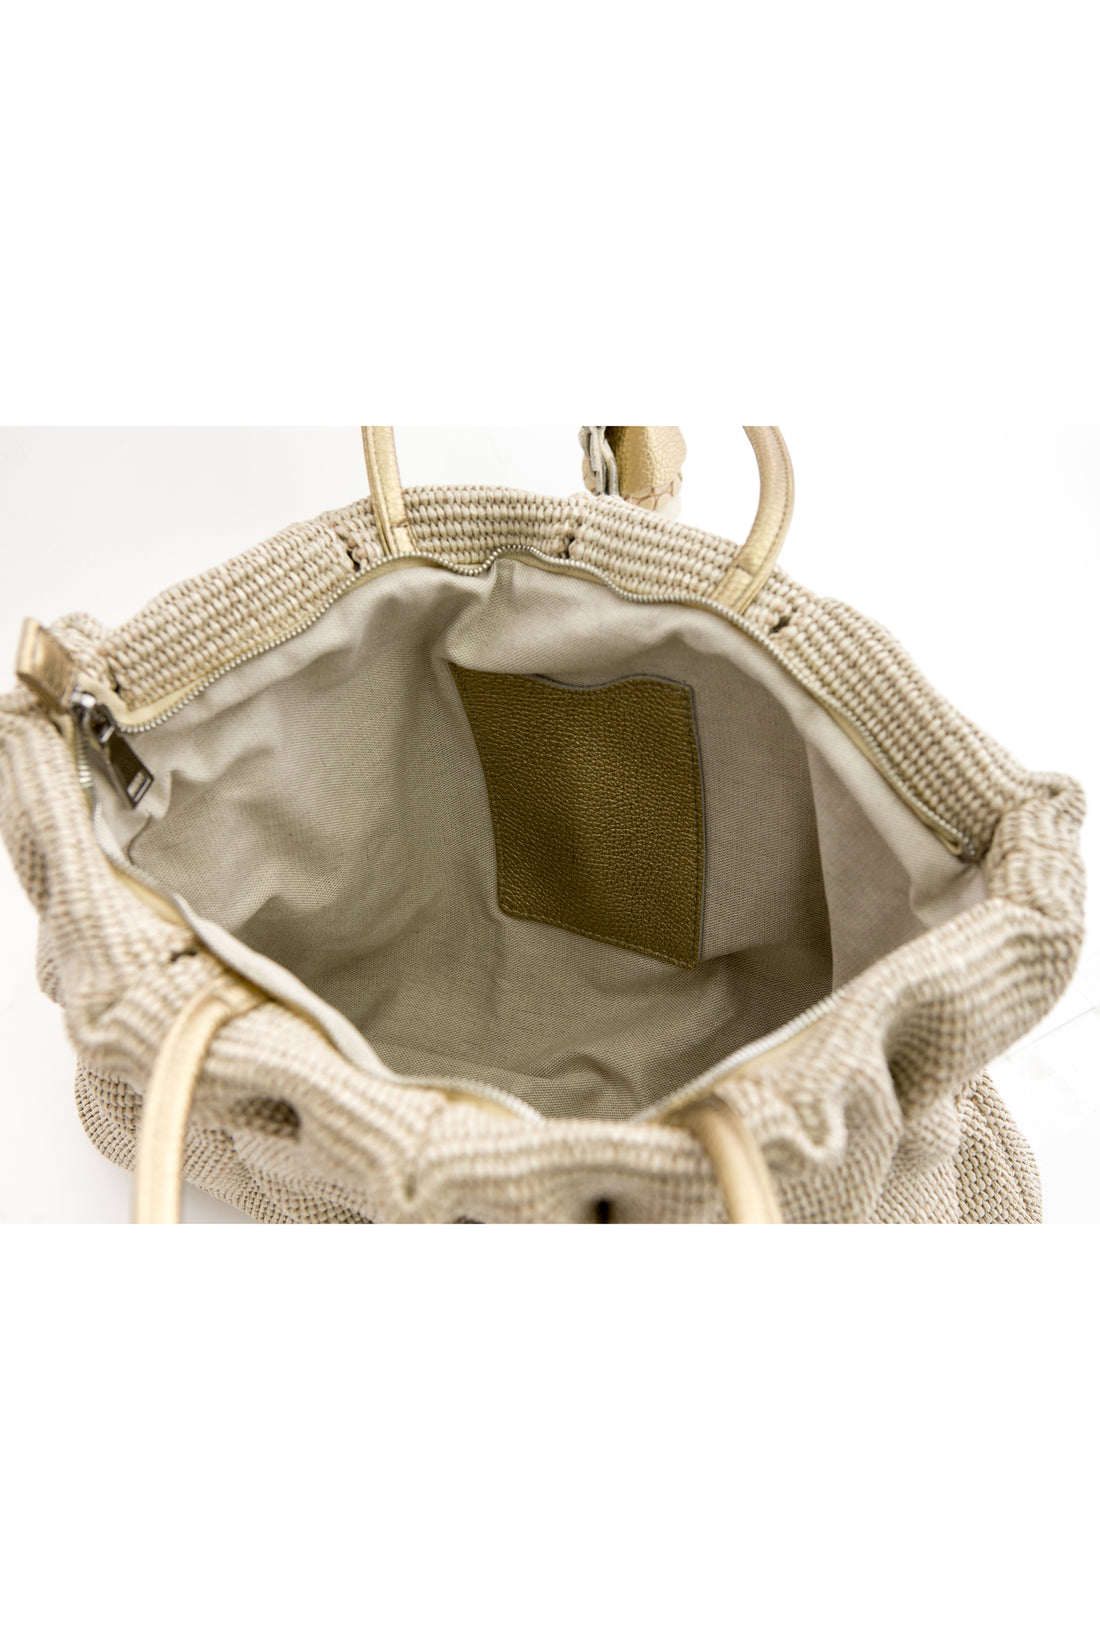 Cotton Carryall Tote Bag